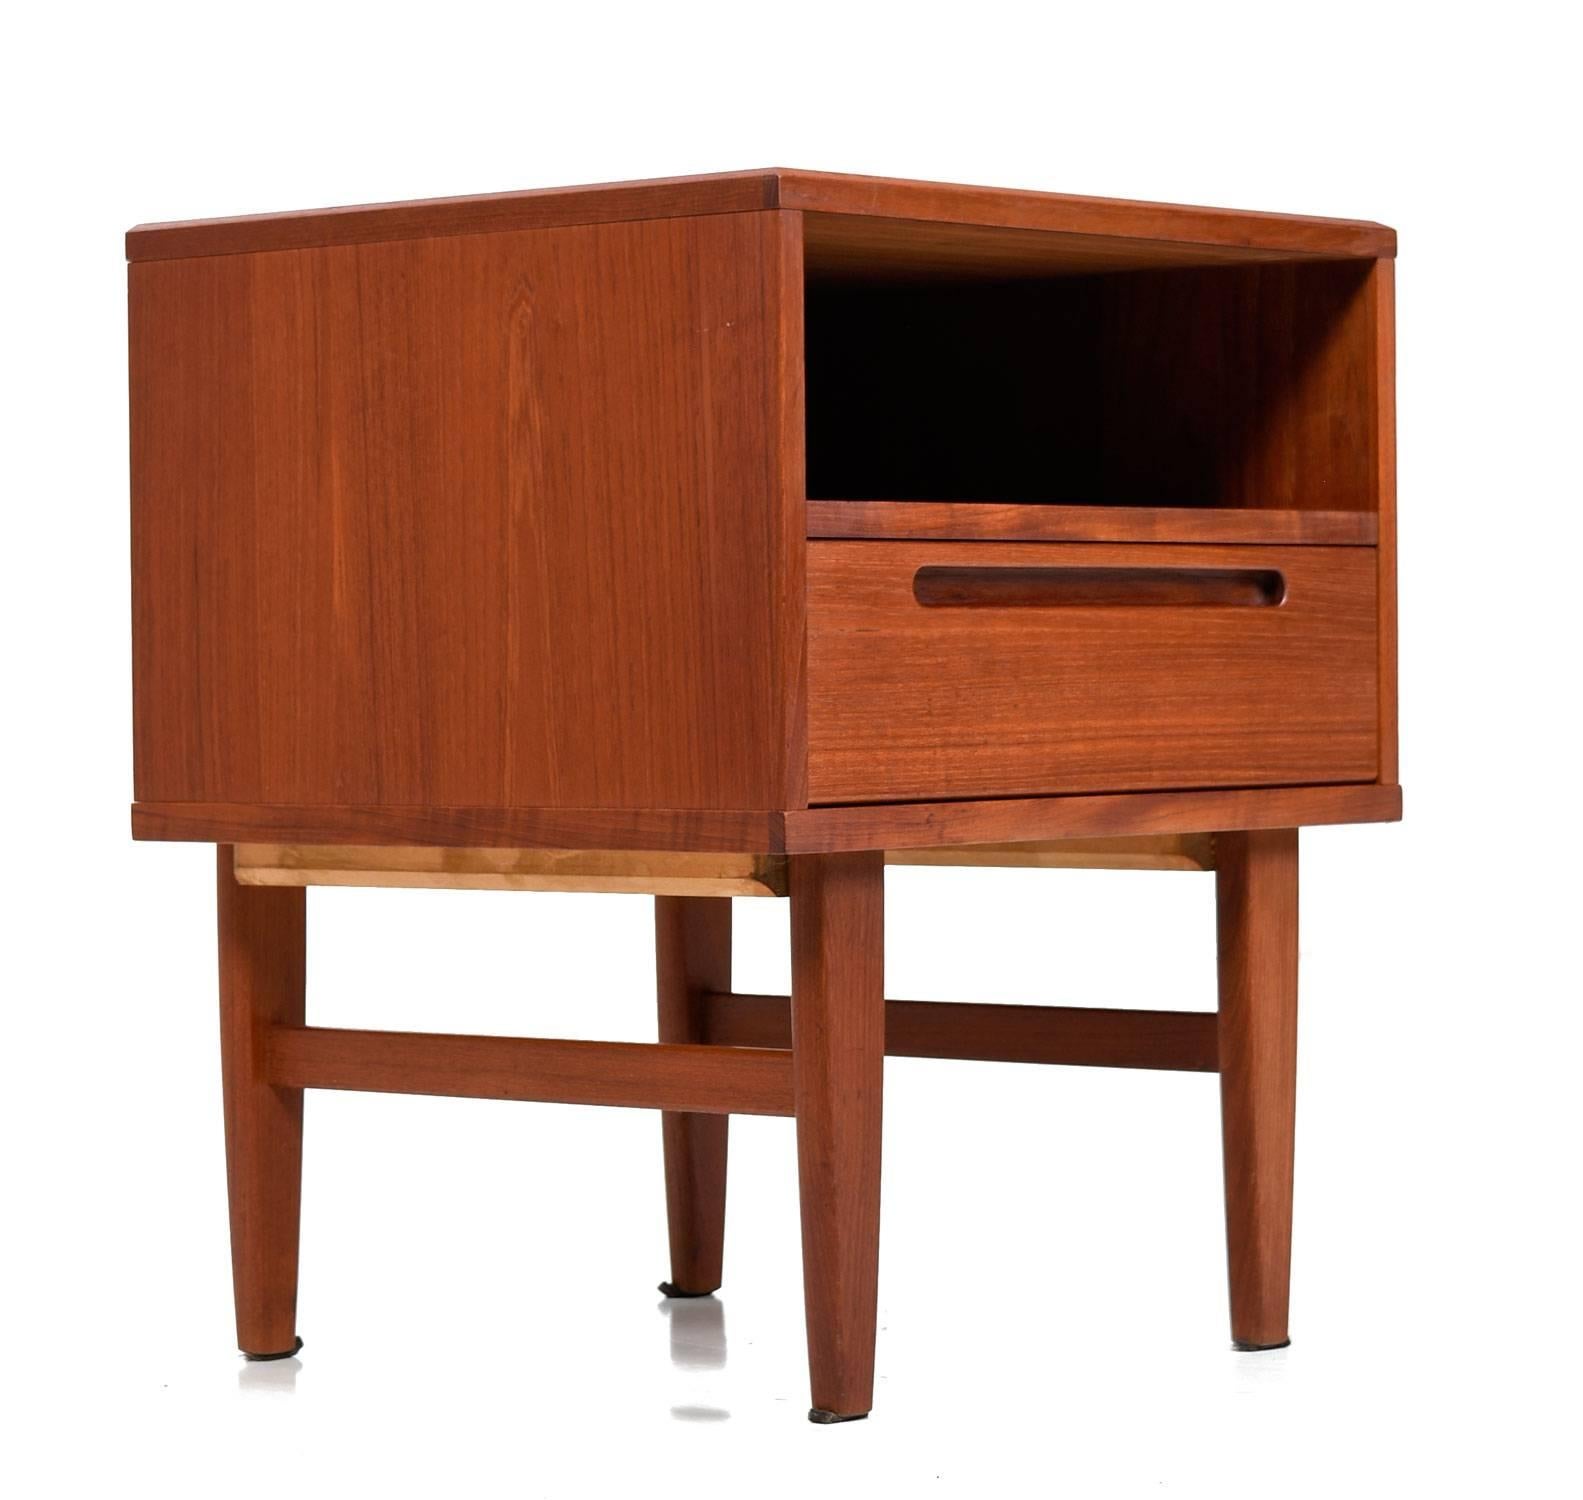 Expertly crafted Mid-Century Modern Danish teak nightstand by Nils Jönsson for HJN Møbler. This pieces is an exemplary specimen of Danish cabinet making. Tightly dovetailed drawers, no particle board, beautiful teak wood and easy gliding drawers are